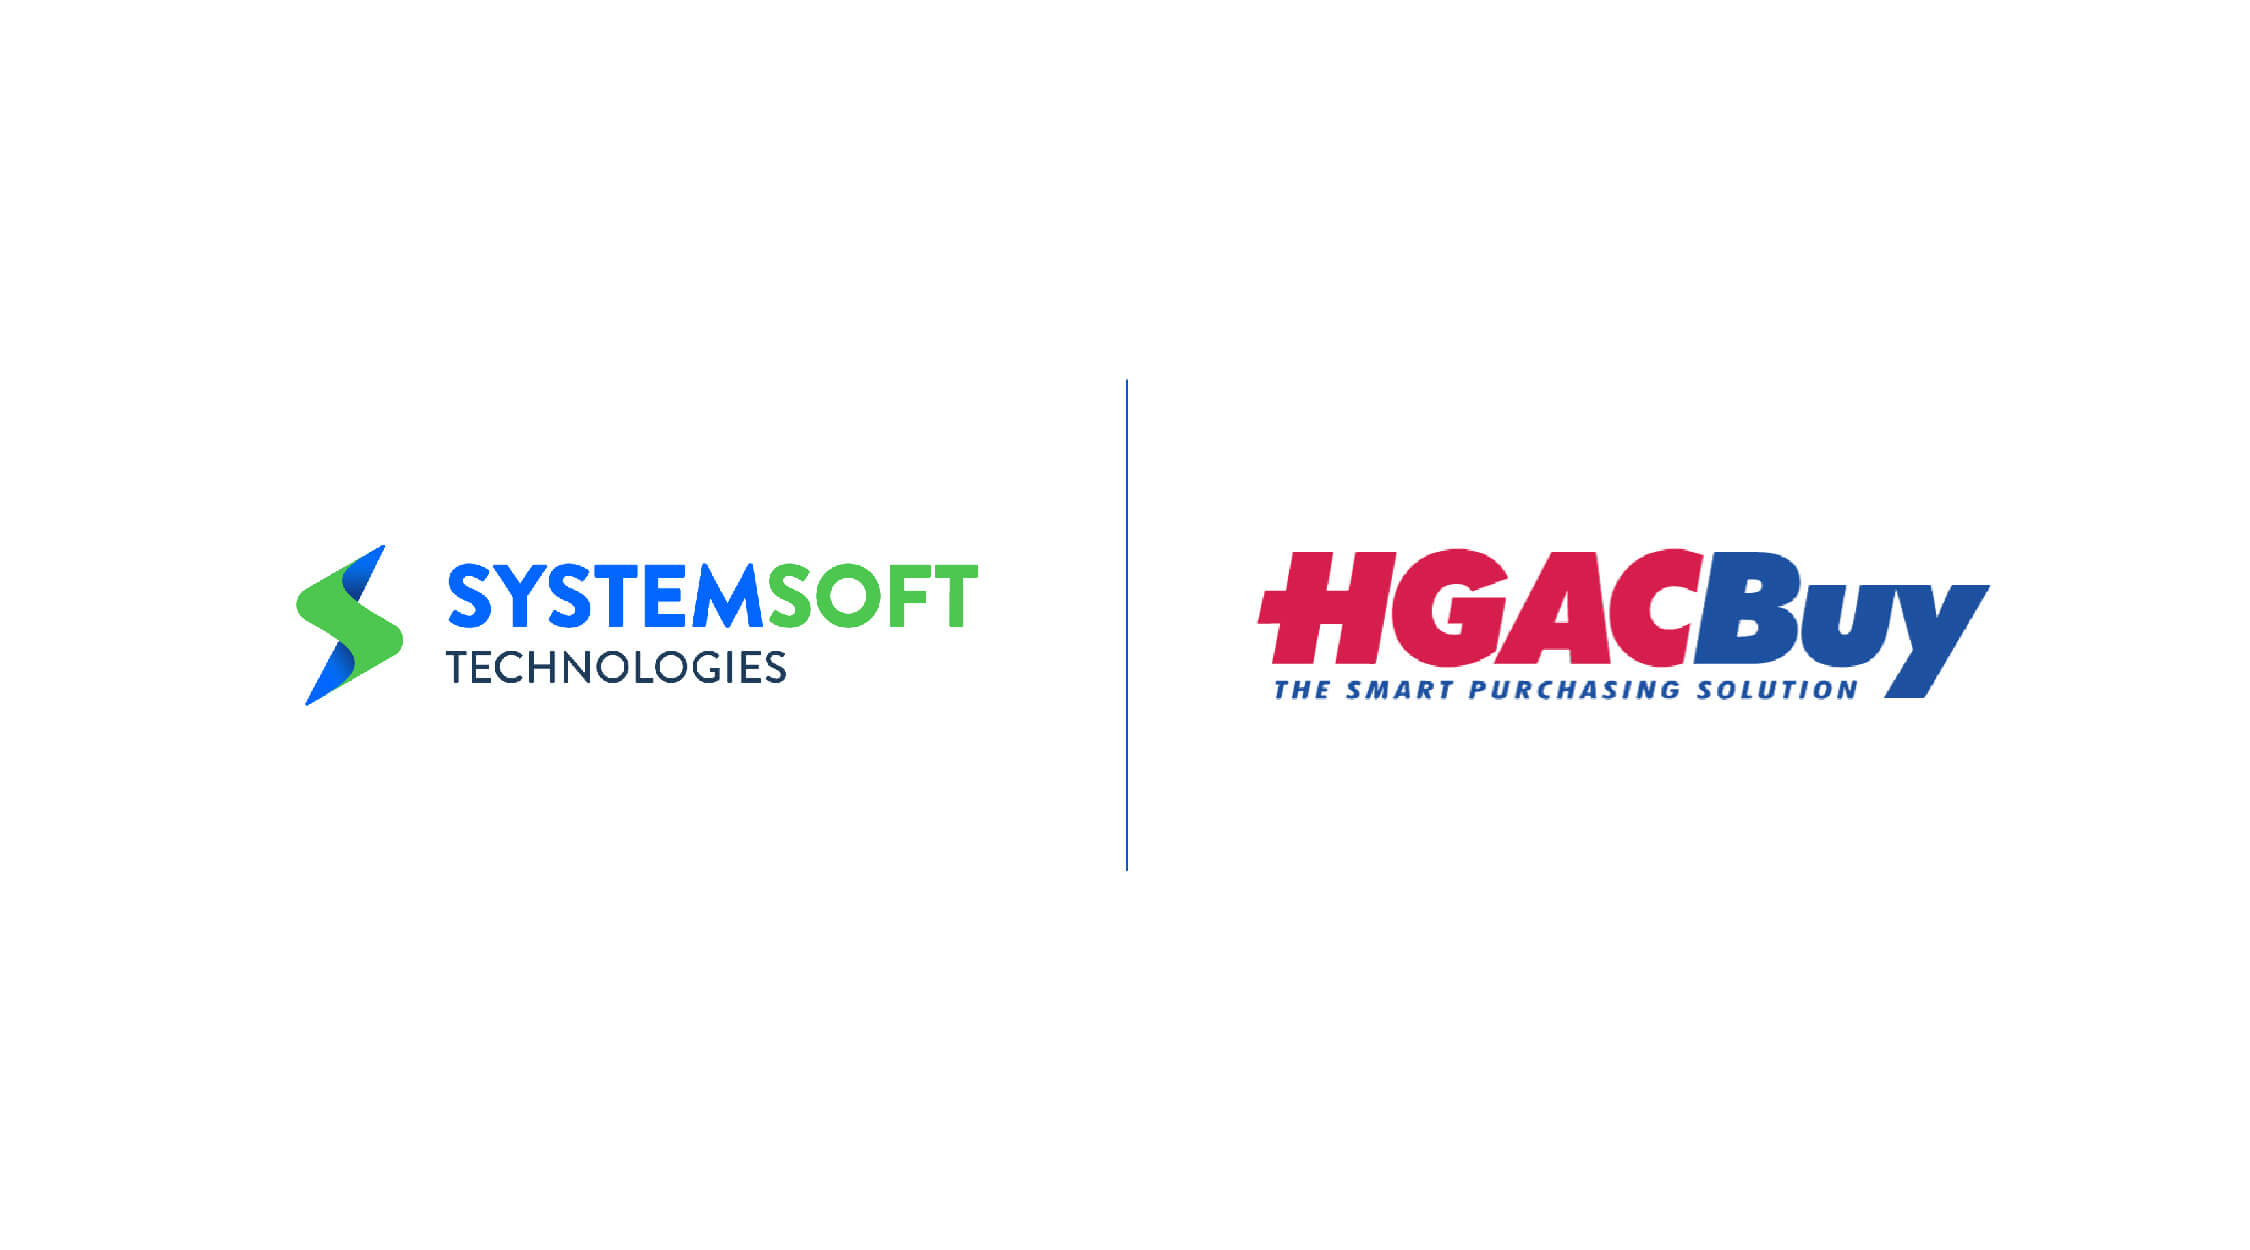 system soft technologies and hgacbuy partnership